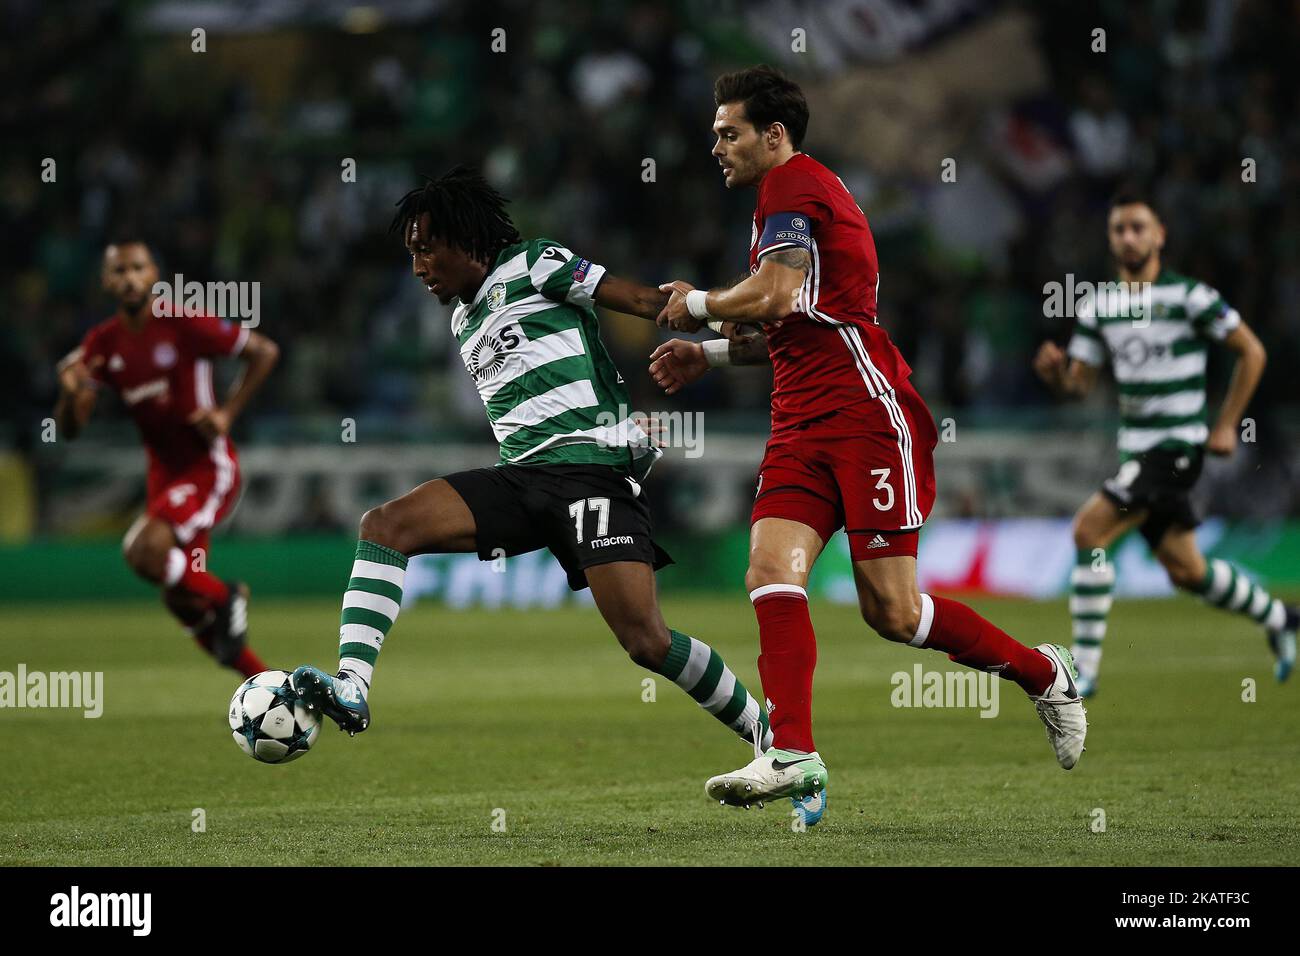 Sporting's forward Gelson Martins (L) vies for the ball with Olympiakos's defender Alberto Botia (R) during Champions League 2017/18 match between Sporting CP vs Olympiakos Piraeus, in Lisbon, on November 22, 2017. (Photo by Carlos Palma/NurPhoto) Stock Photo